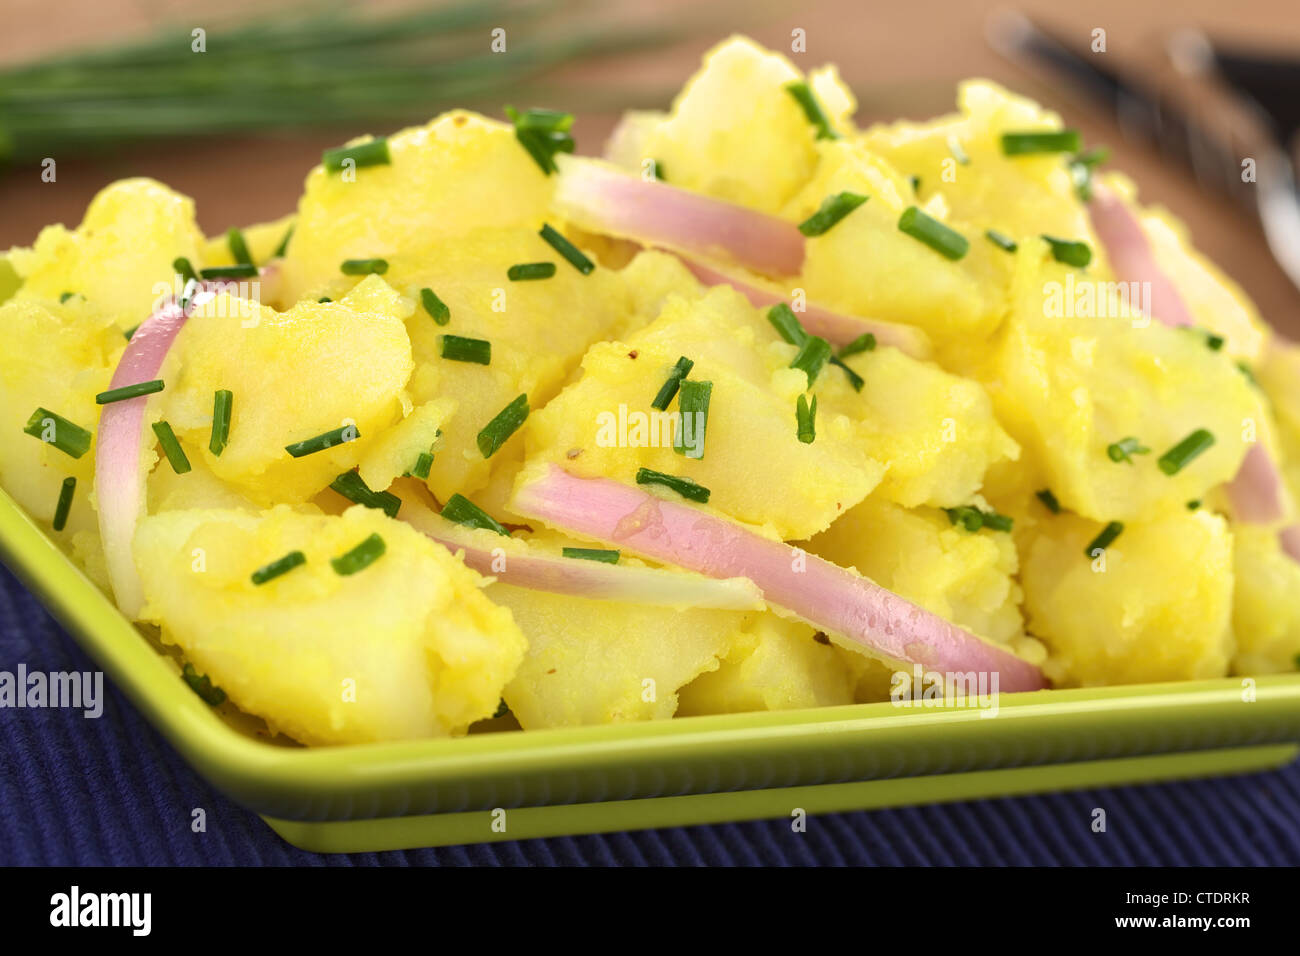 Potato salad with onions prepared in Swabian-Style (Southern Germany) with a vinegar-mustard sauce garnished with chives Stock Photo